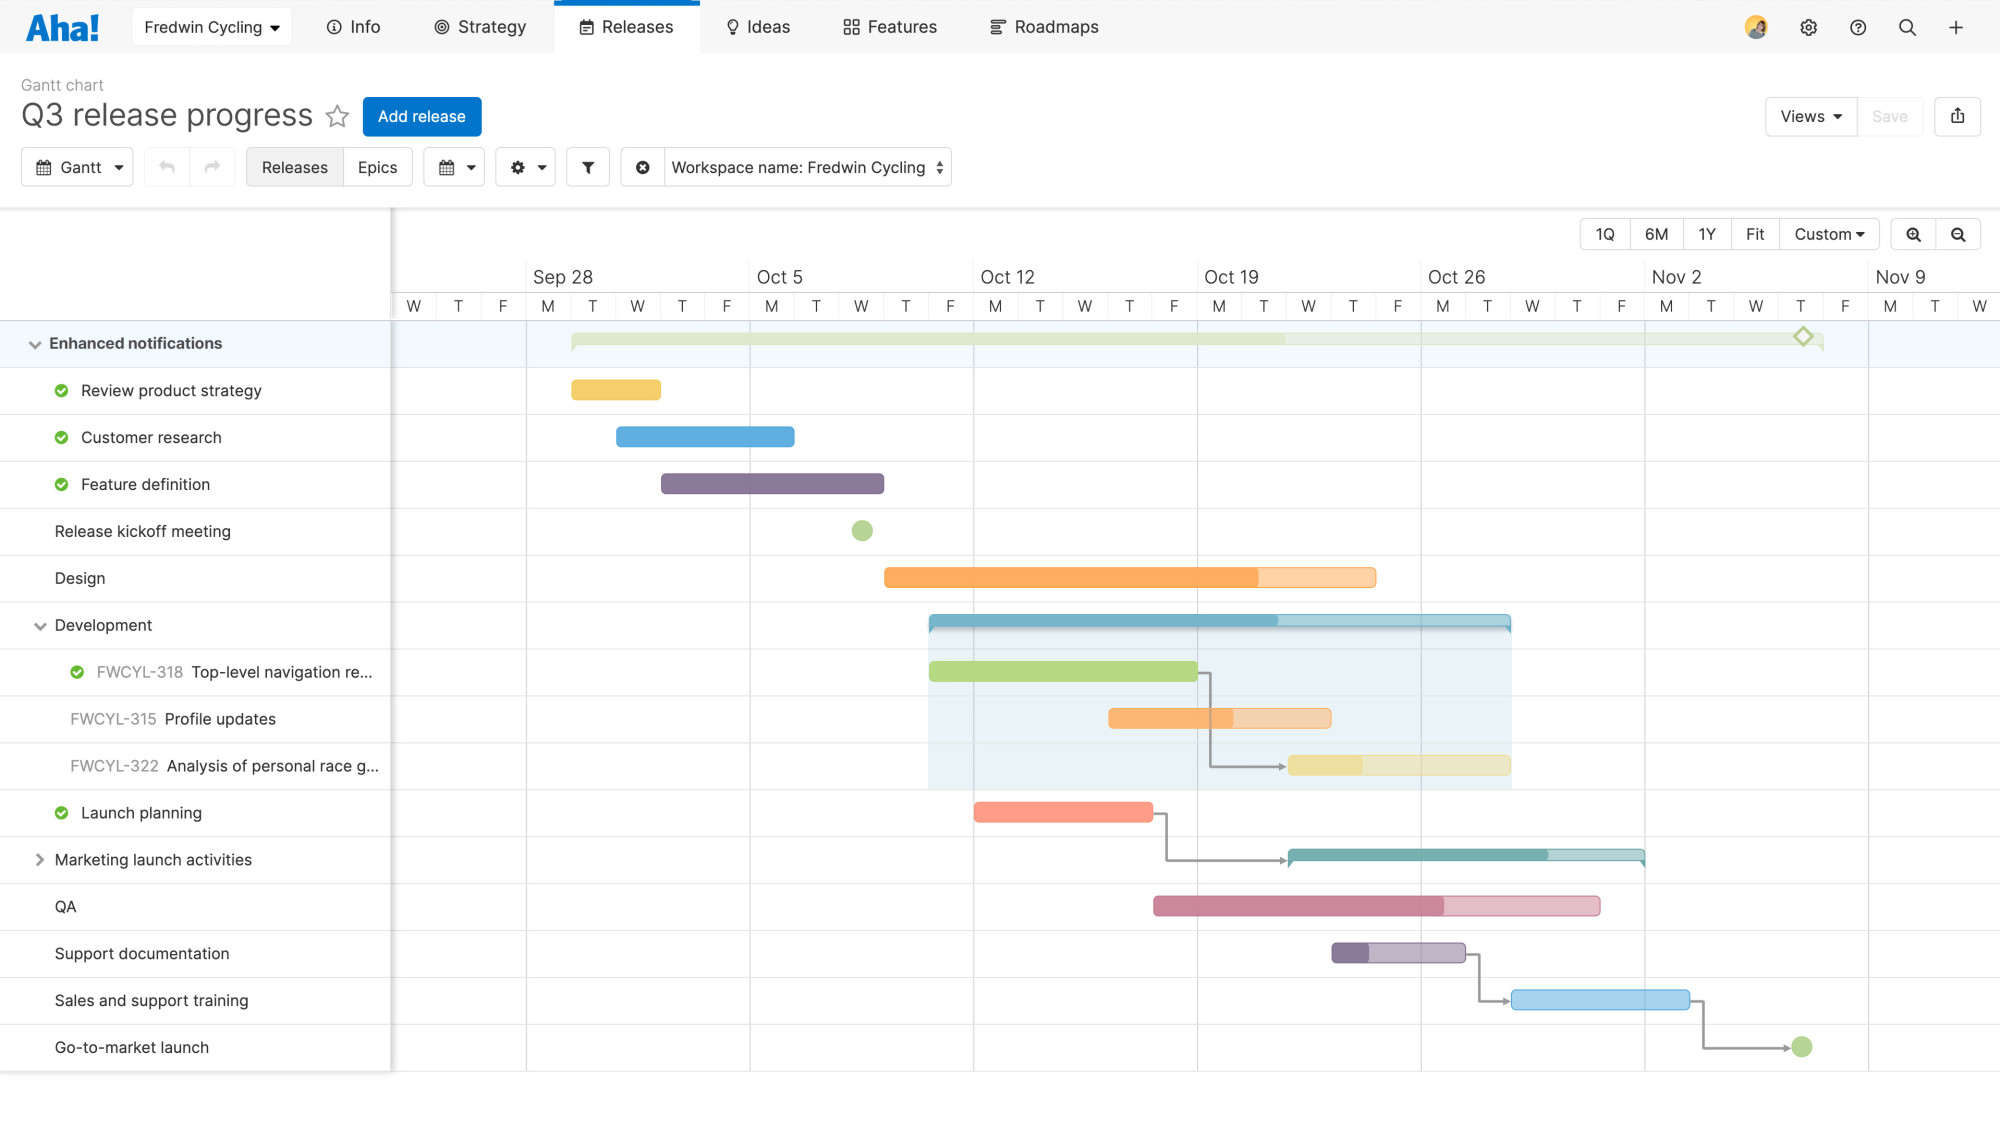 Gantt chart showing releases by phase with their child features linked by dependencies.